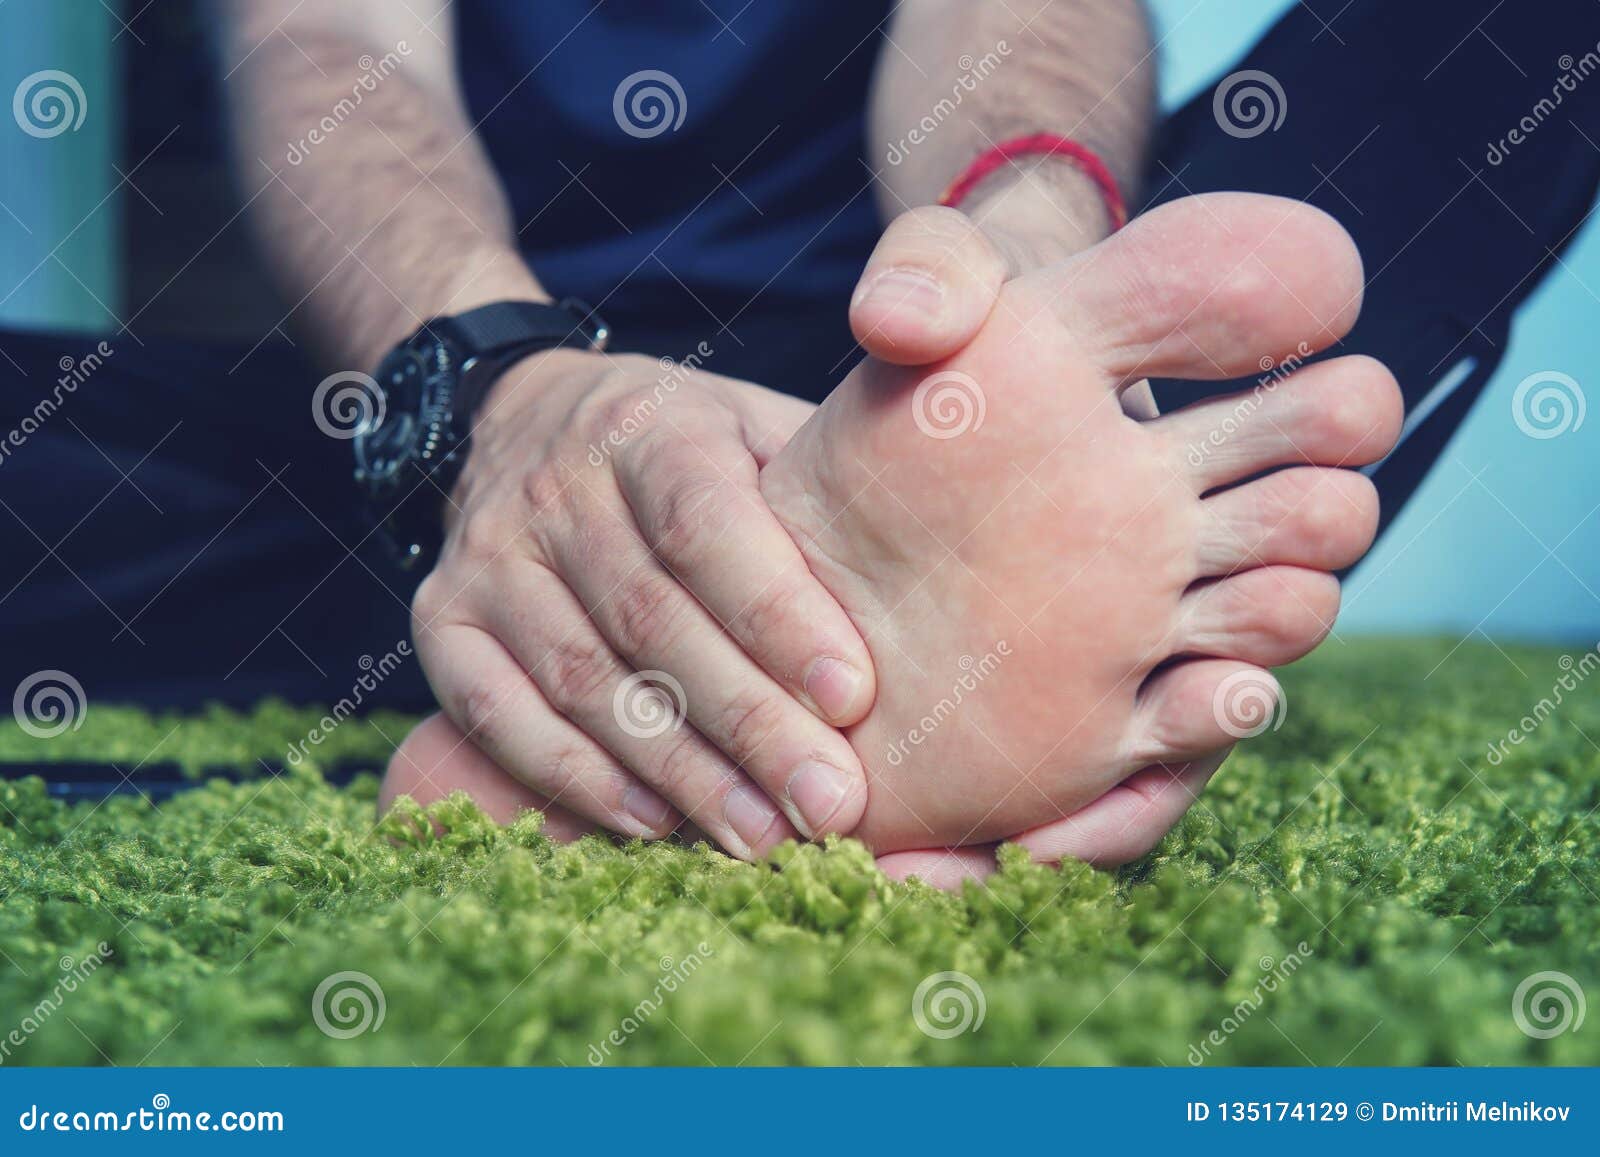 man with painful and inflamed gout on his foot around the big toe area